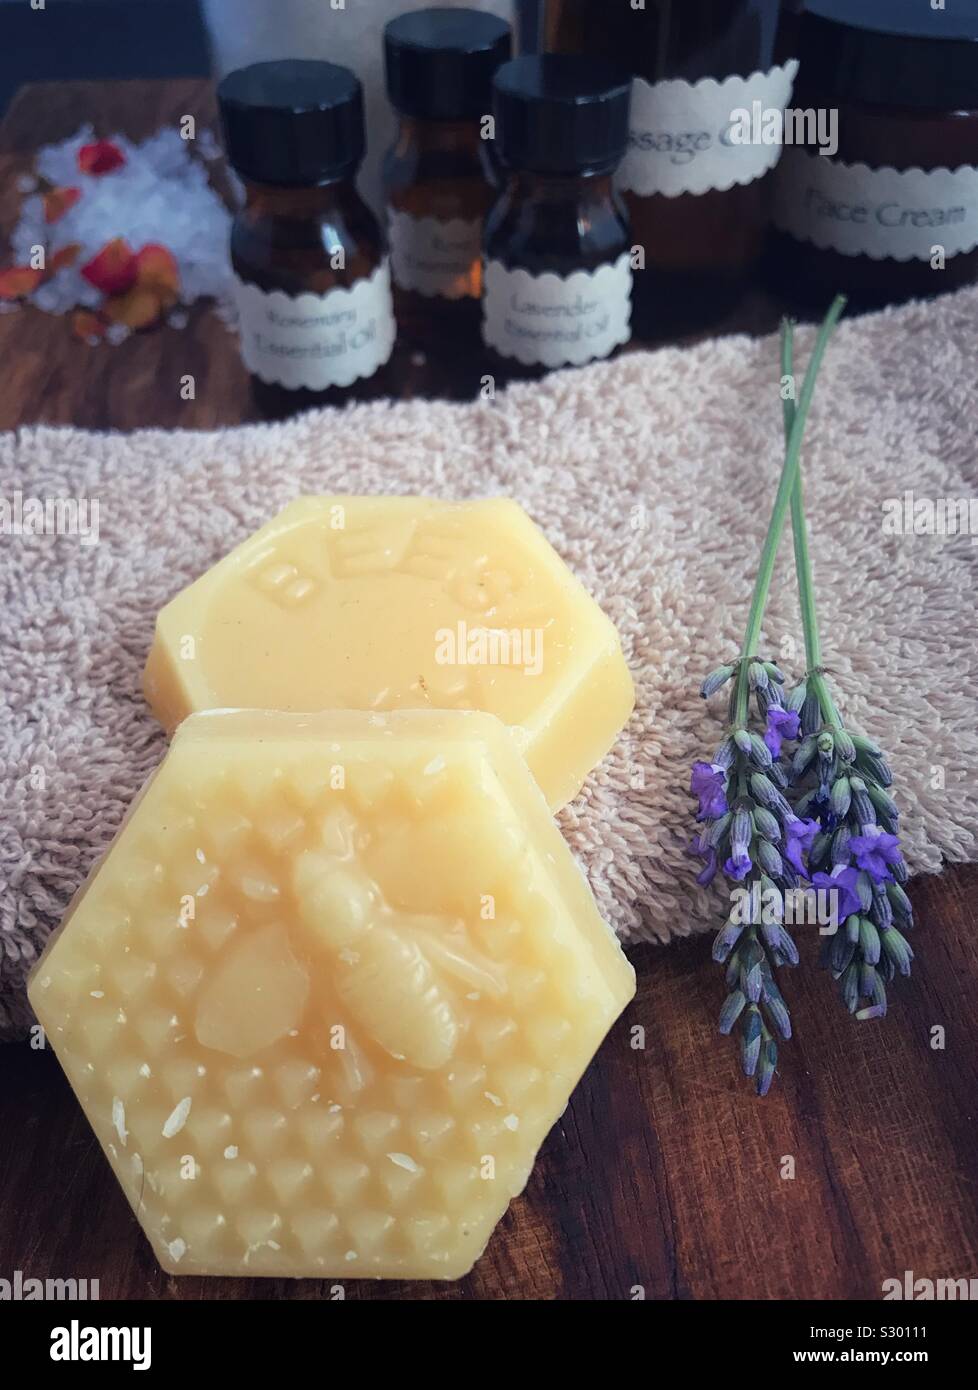 Beeswax and Lavender with generic aromatherapy bottles in the background. Stock Photo